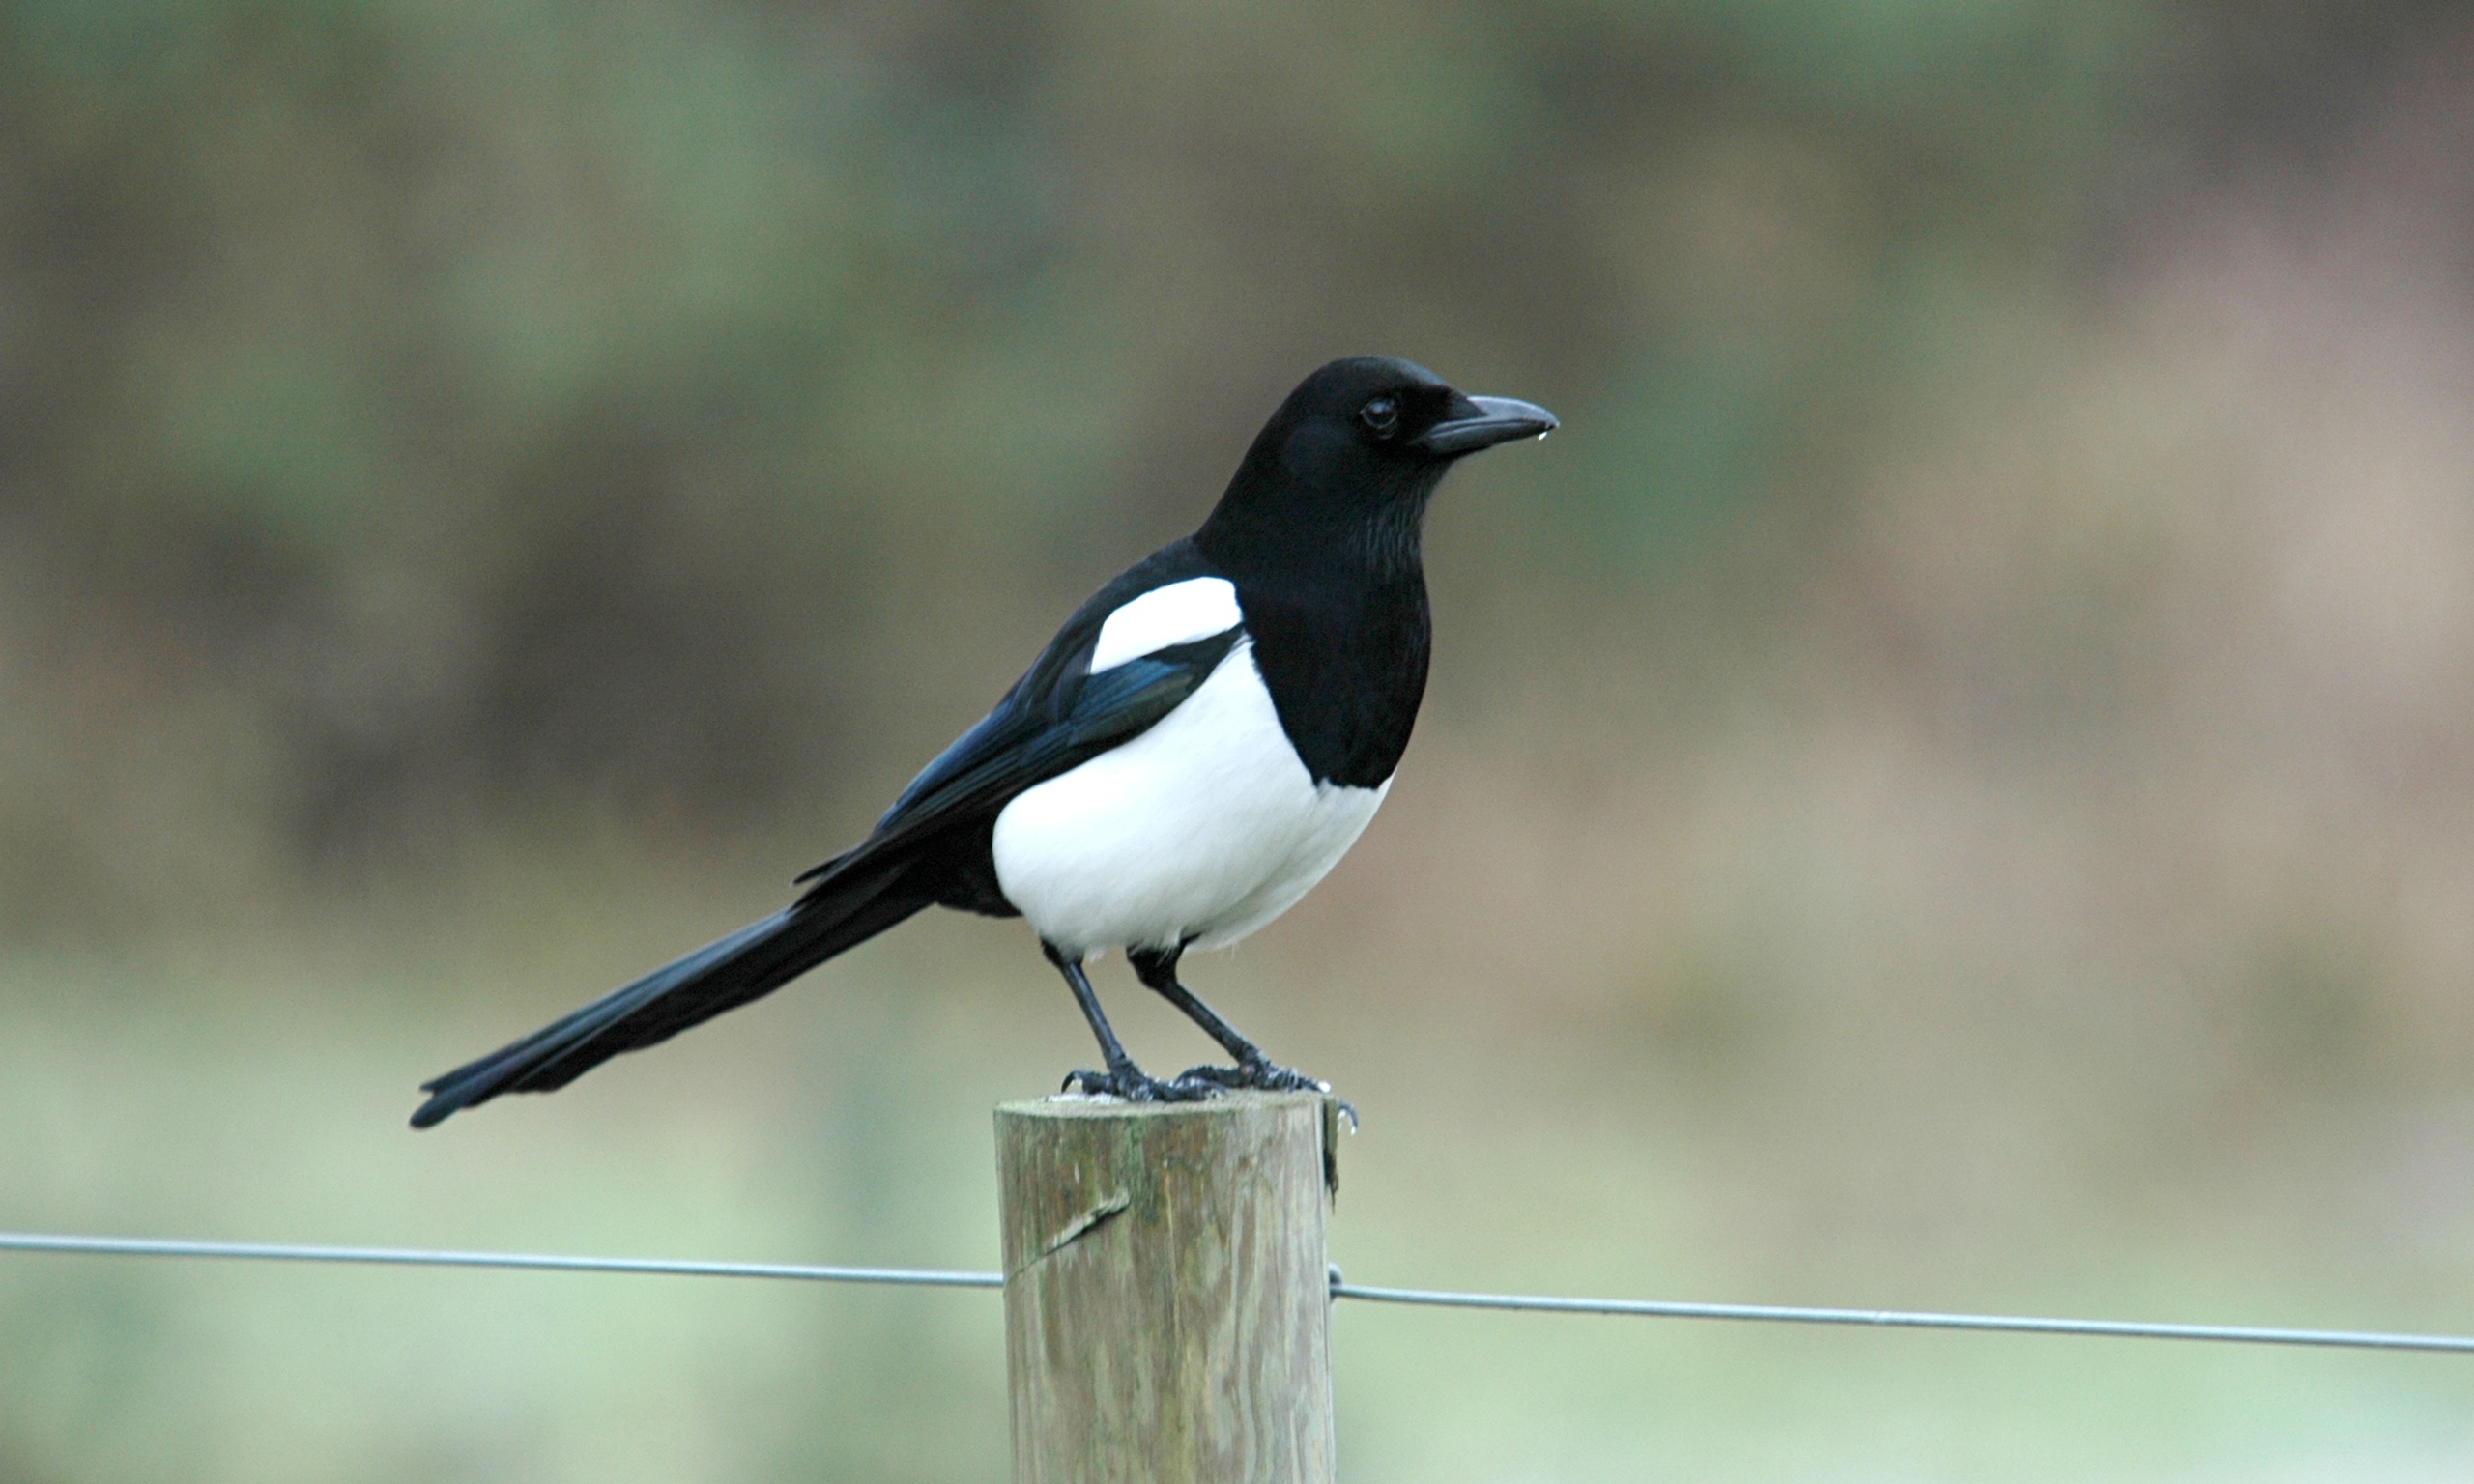 Silver has no shine for magpies | Environment | The Guardian